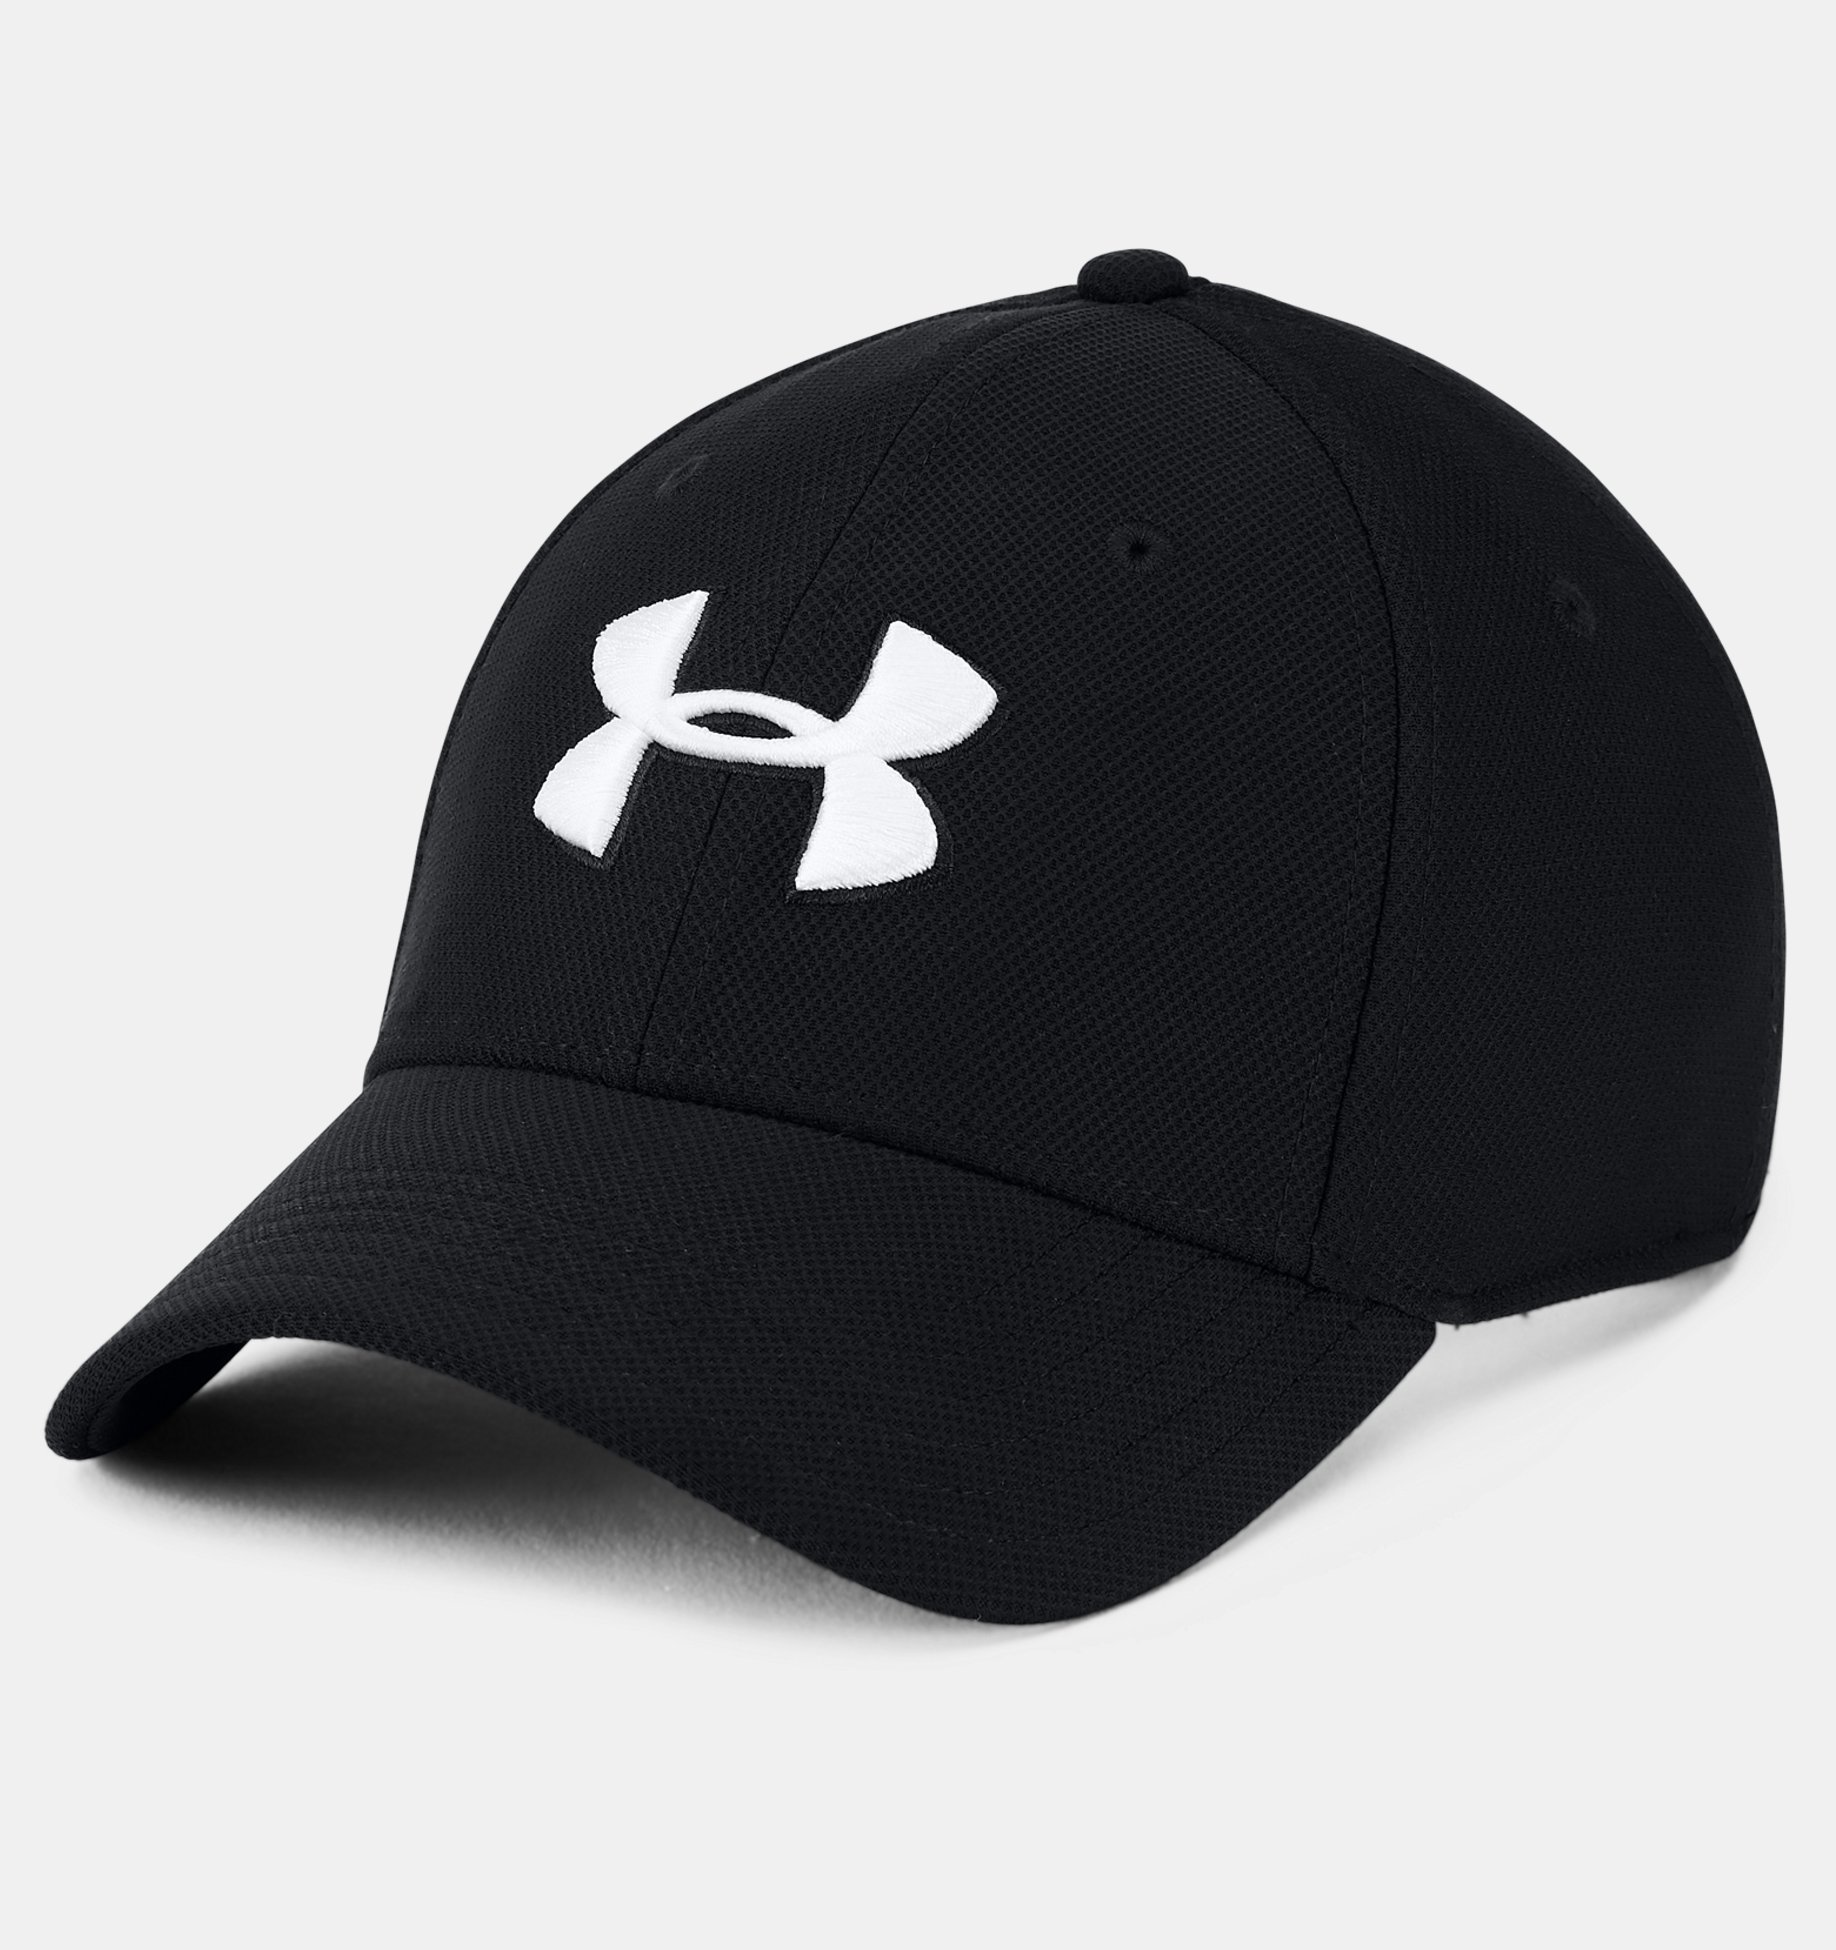 https://www.underarmour.com.ar/on/demandware.static/-/Sites-underarmour_staging/default/dwdf18cac3/new_images/1305036/191169572245/191169572245-1.jpeg